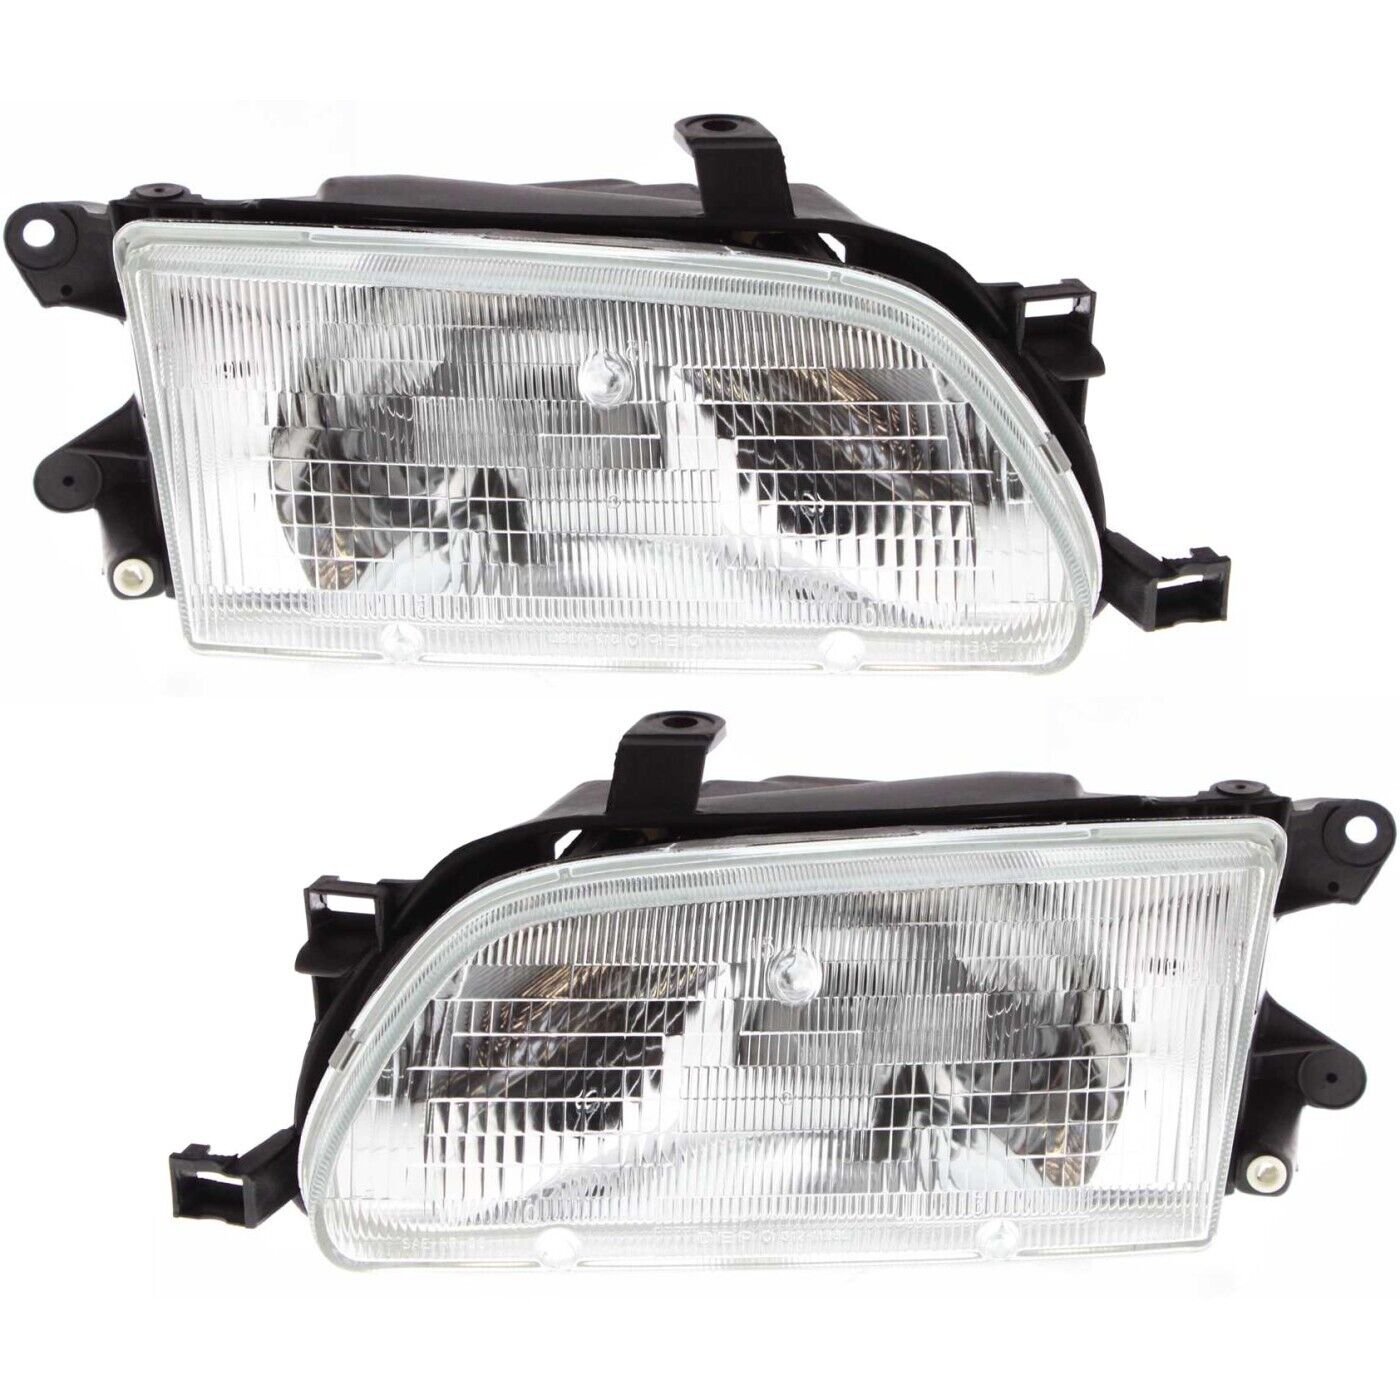 Headlight Set For 95-96 Toyota Tercel Left and Right With Bulb 2Pc